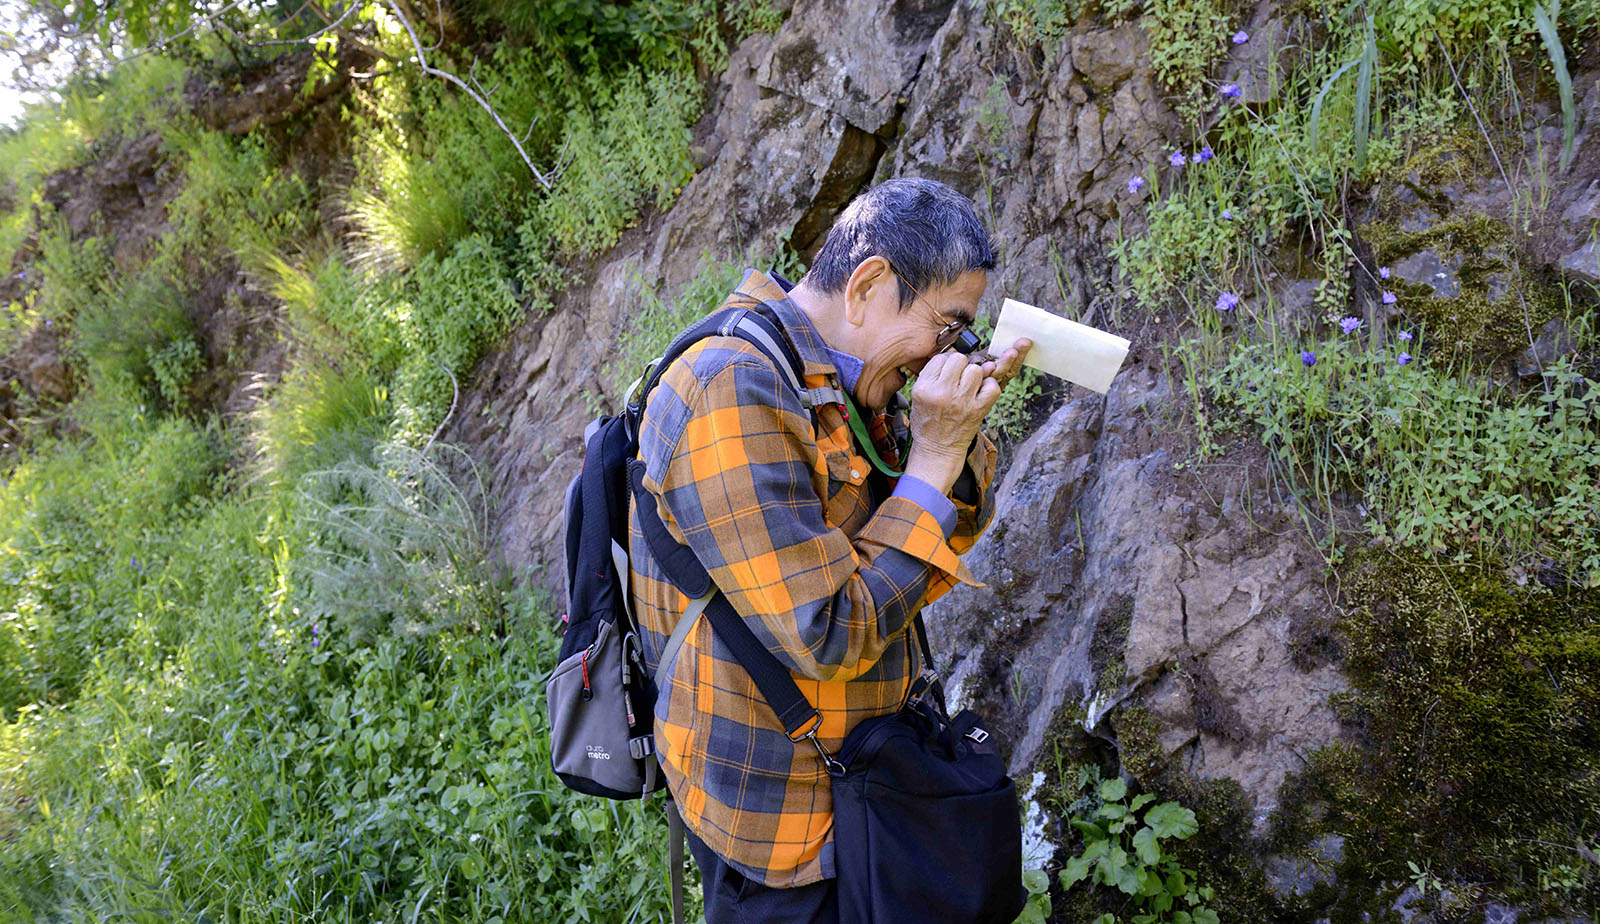 BioBlitz researcher taking a photo in Perkins Canyon at Mount Diablo State Park